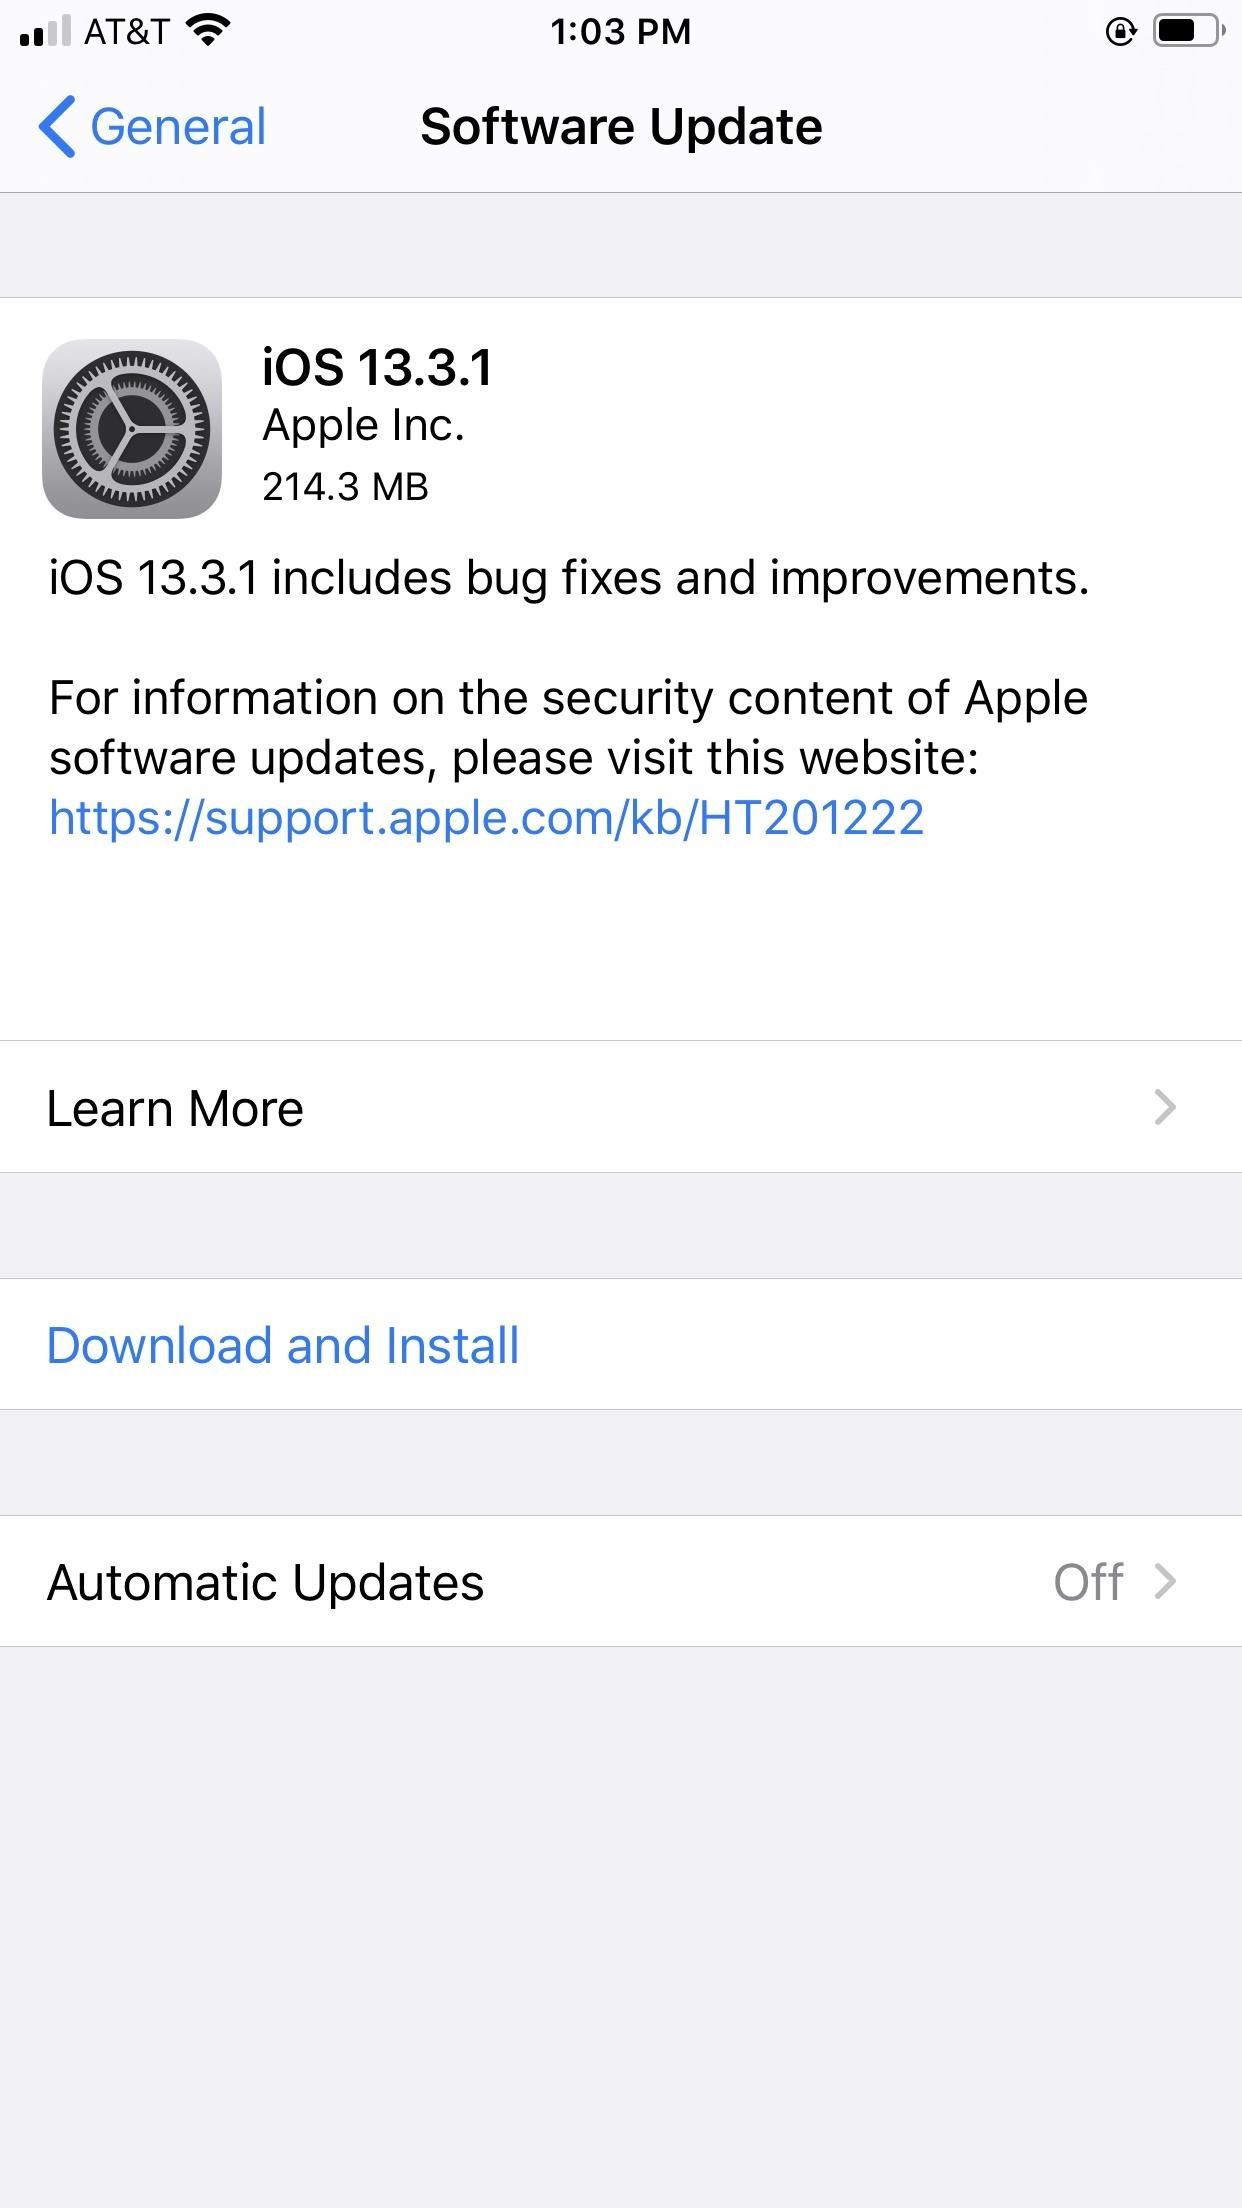 Apple Releases iOS 13.3.1 for iPhone, Fixes Security Bug in Mail App